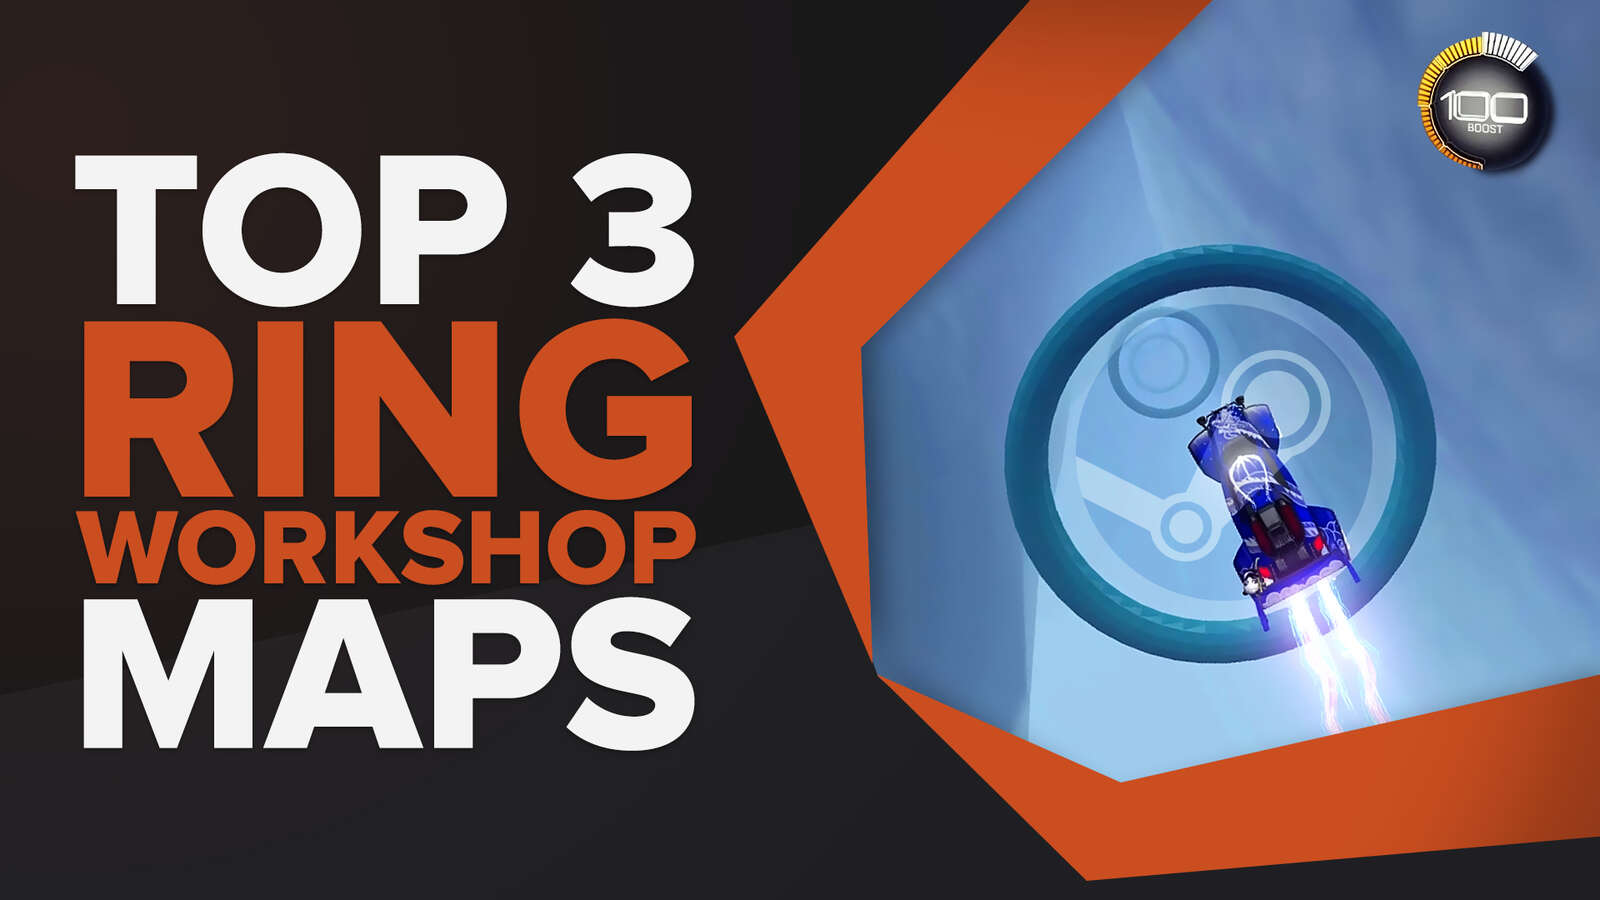 [How-to] Top 3 Rings Workshop Maps With Links To Use and Download Them